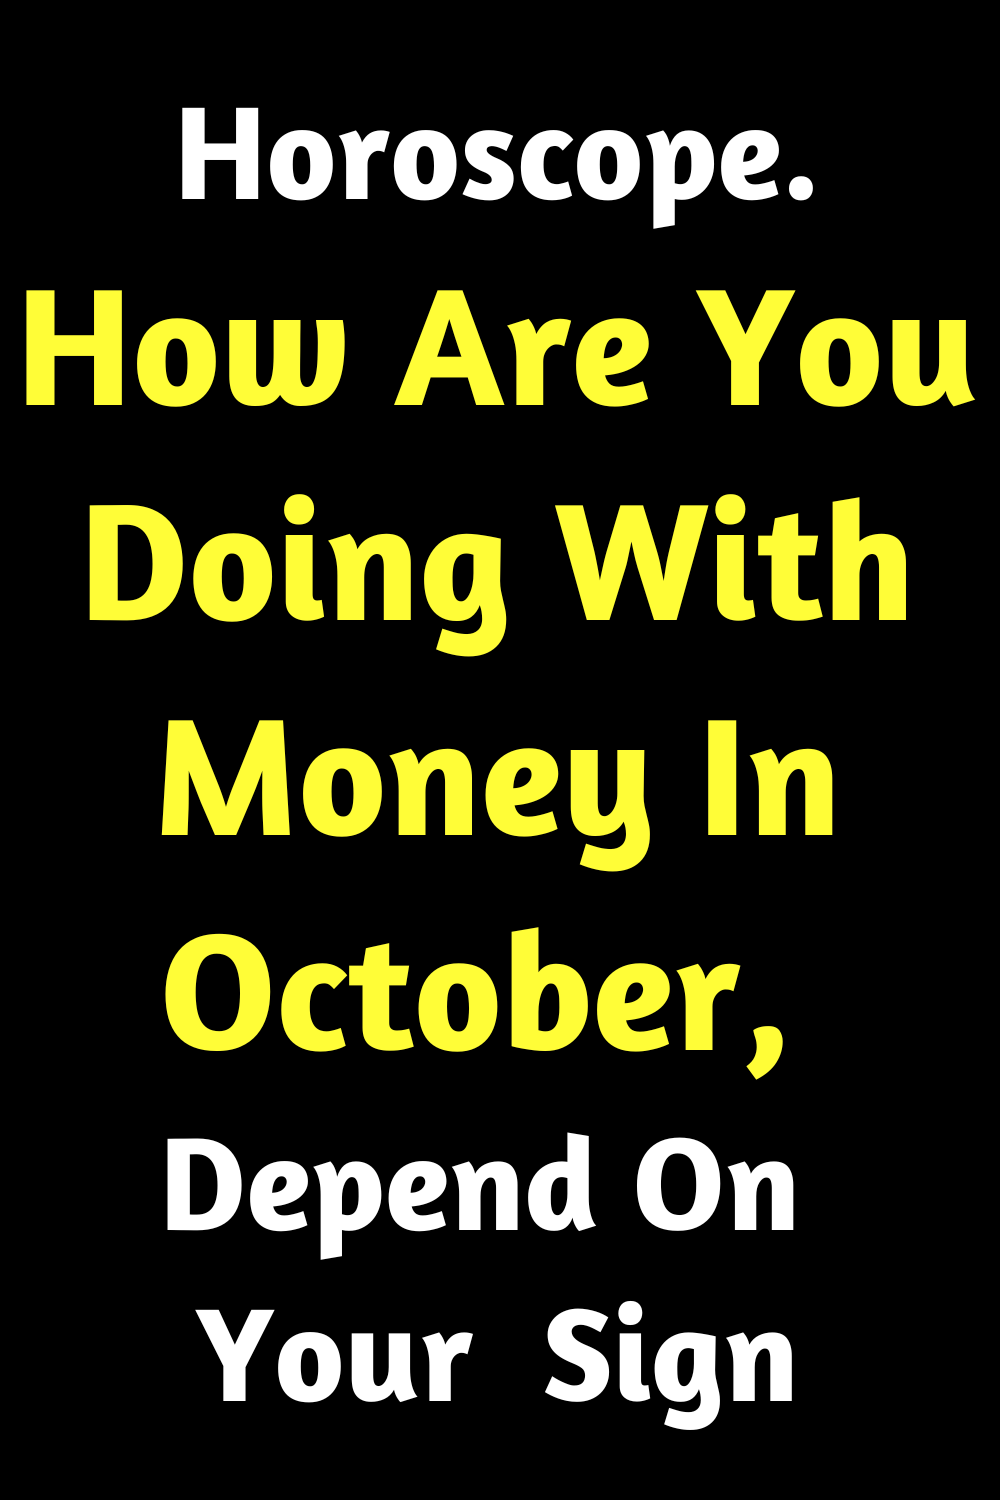 Horoscope. How Are You Doing With Money In October, Depend On Your Sign